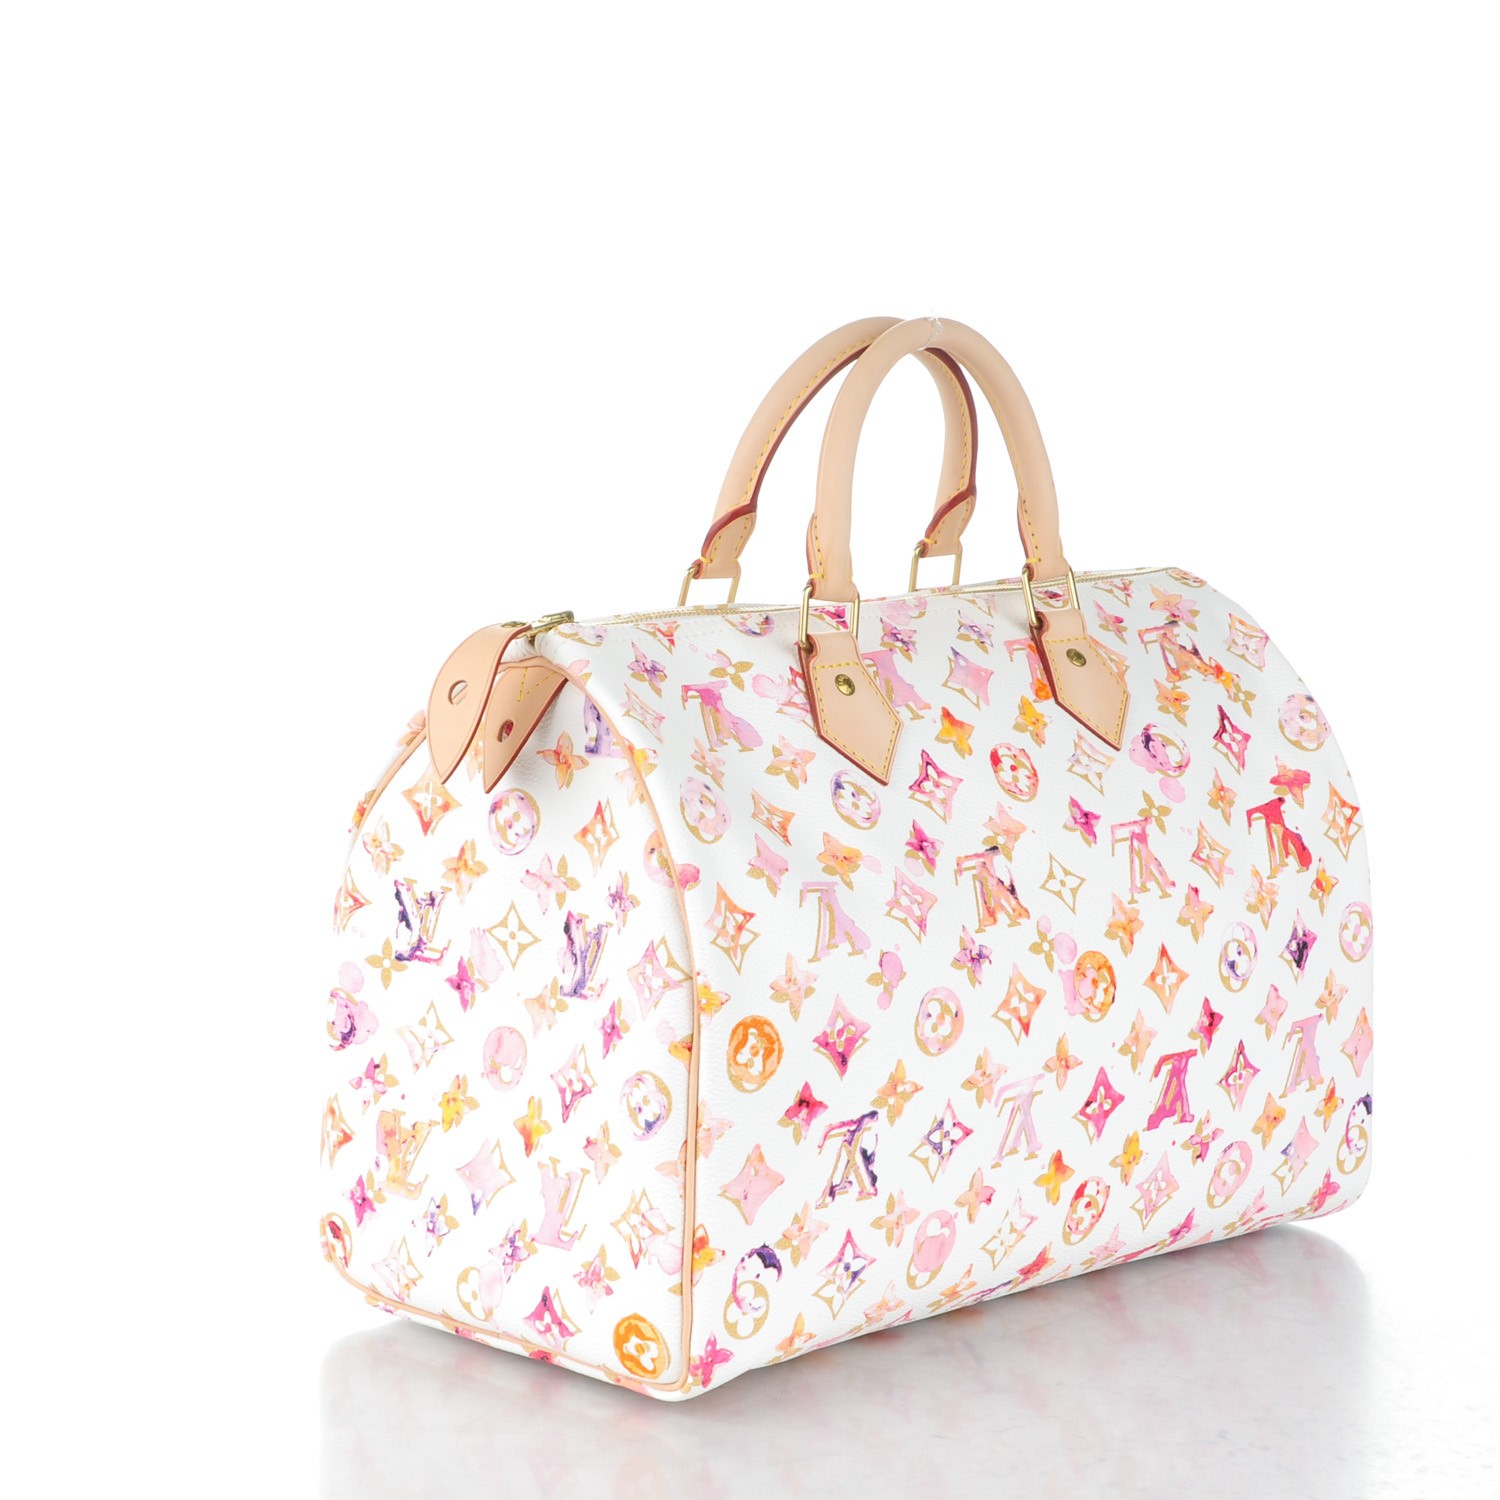 Lv Speedy Watercolor  Natural Resource Department